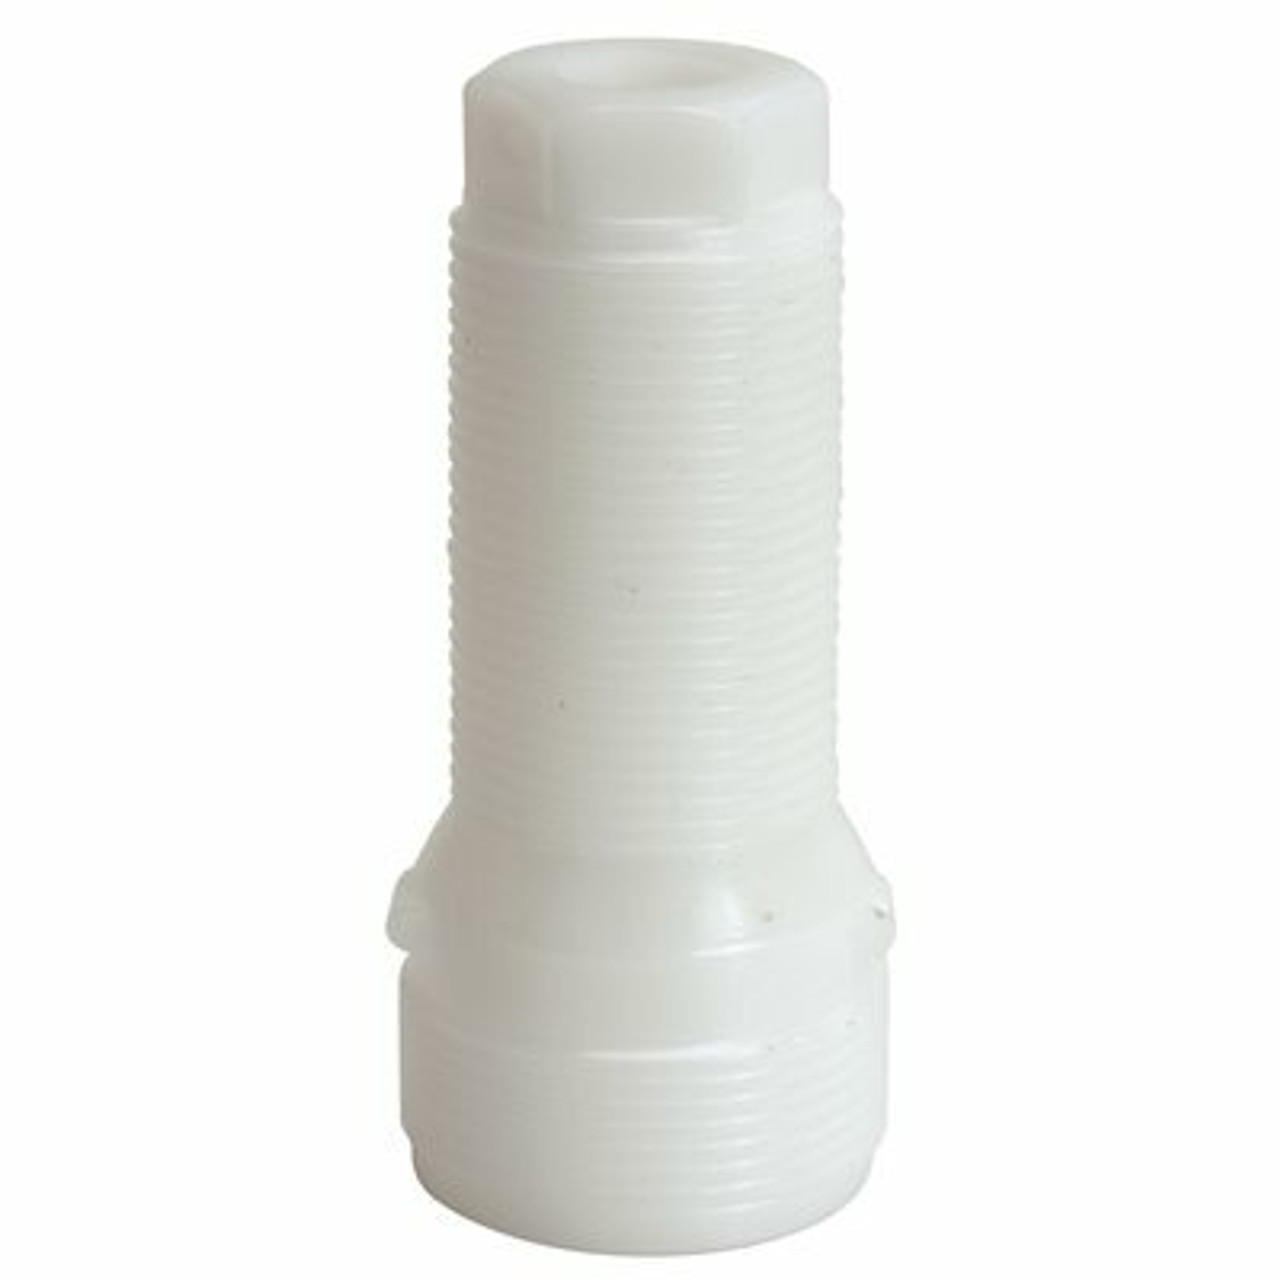 Phoenix Products Nibco Stem Extension Sleeve